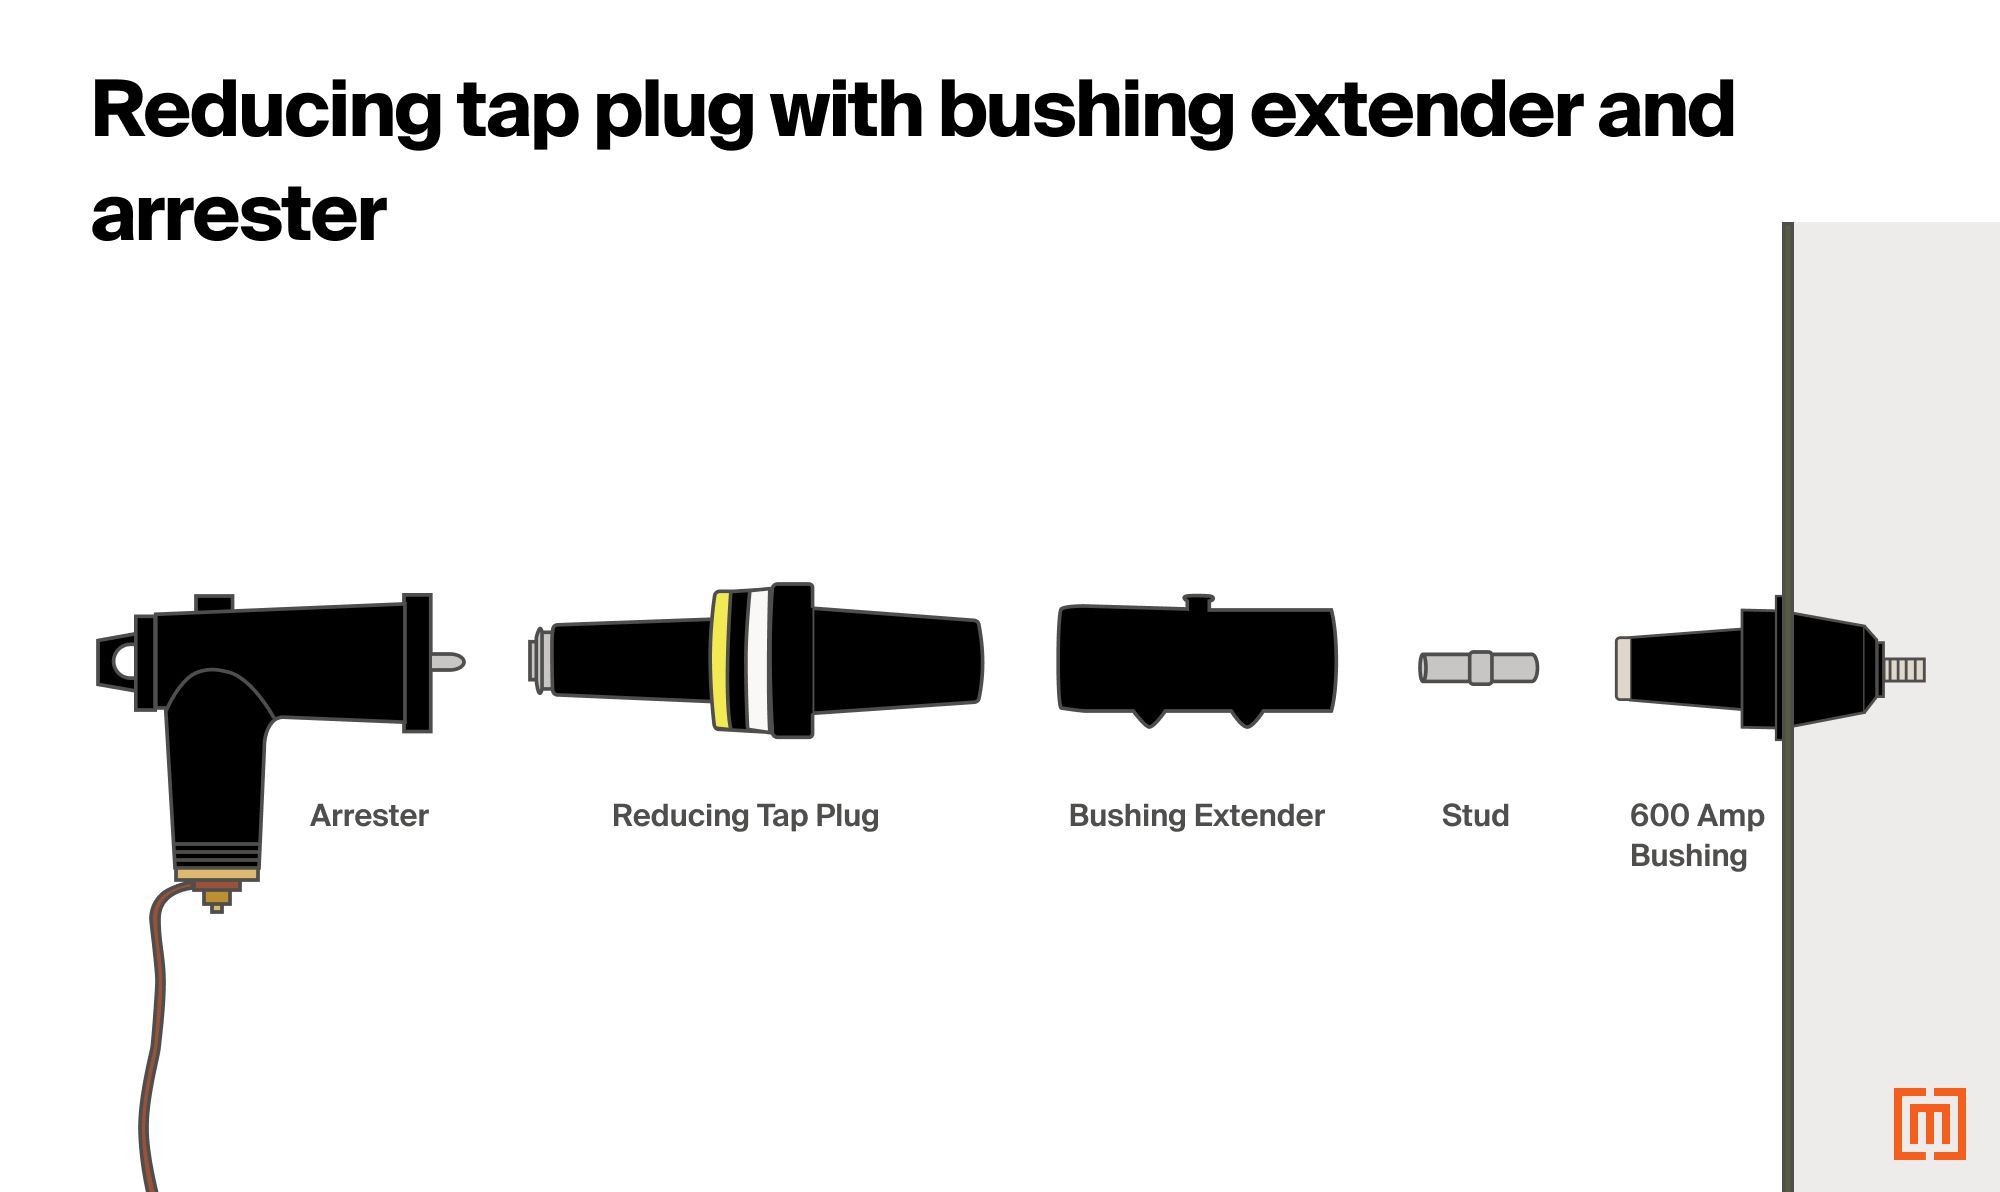 Reducing tap plug connected between a transformer arrester, a bushing extender and a 600 Amp Bushing